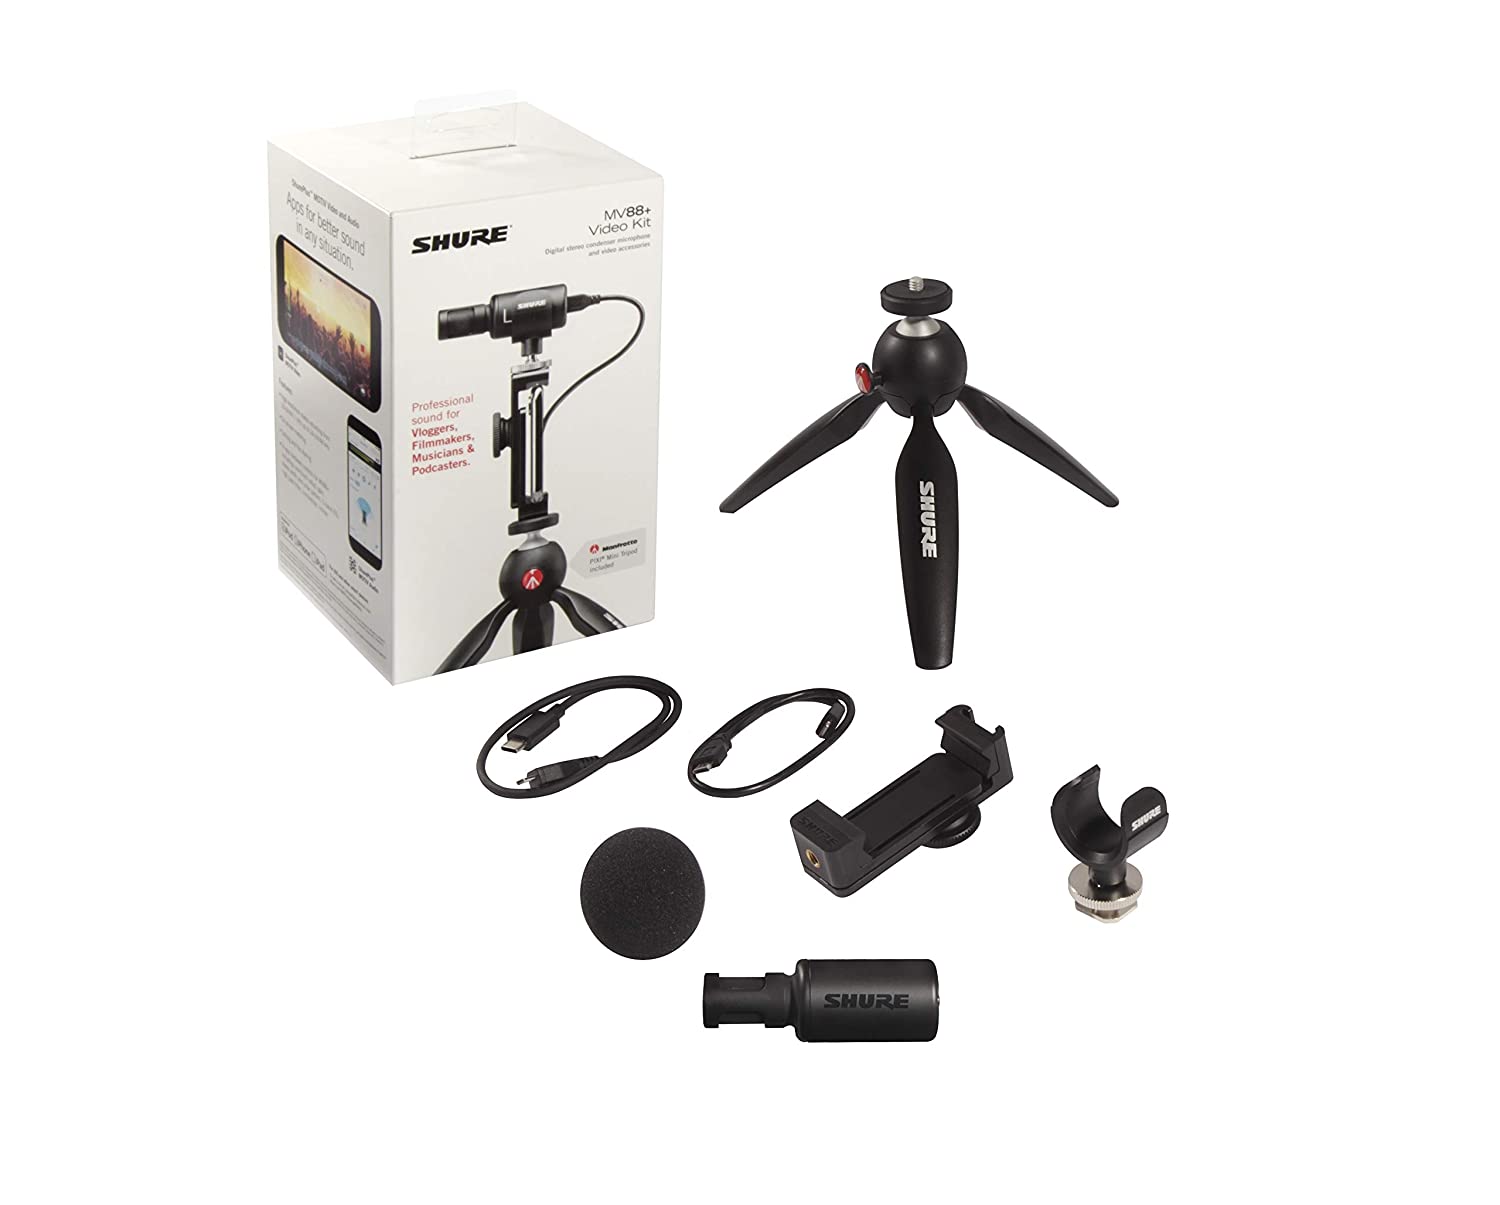 Shure MOTIV MV88+ Video Kit Digital Stereo Microphone and Accessories